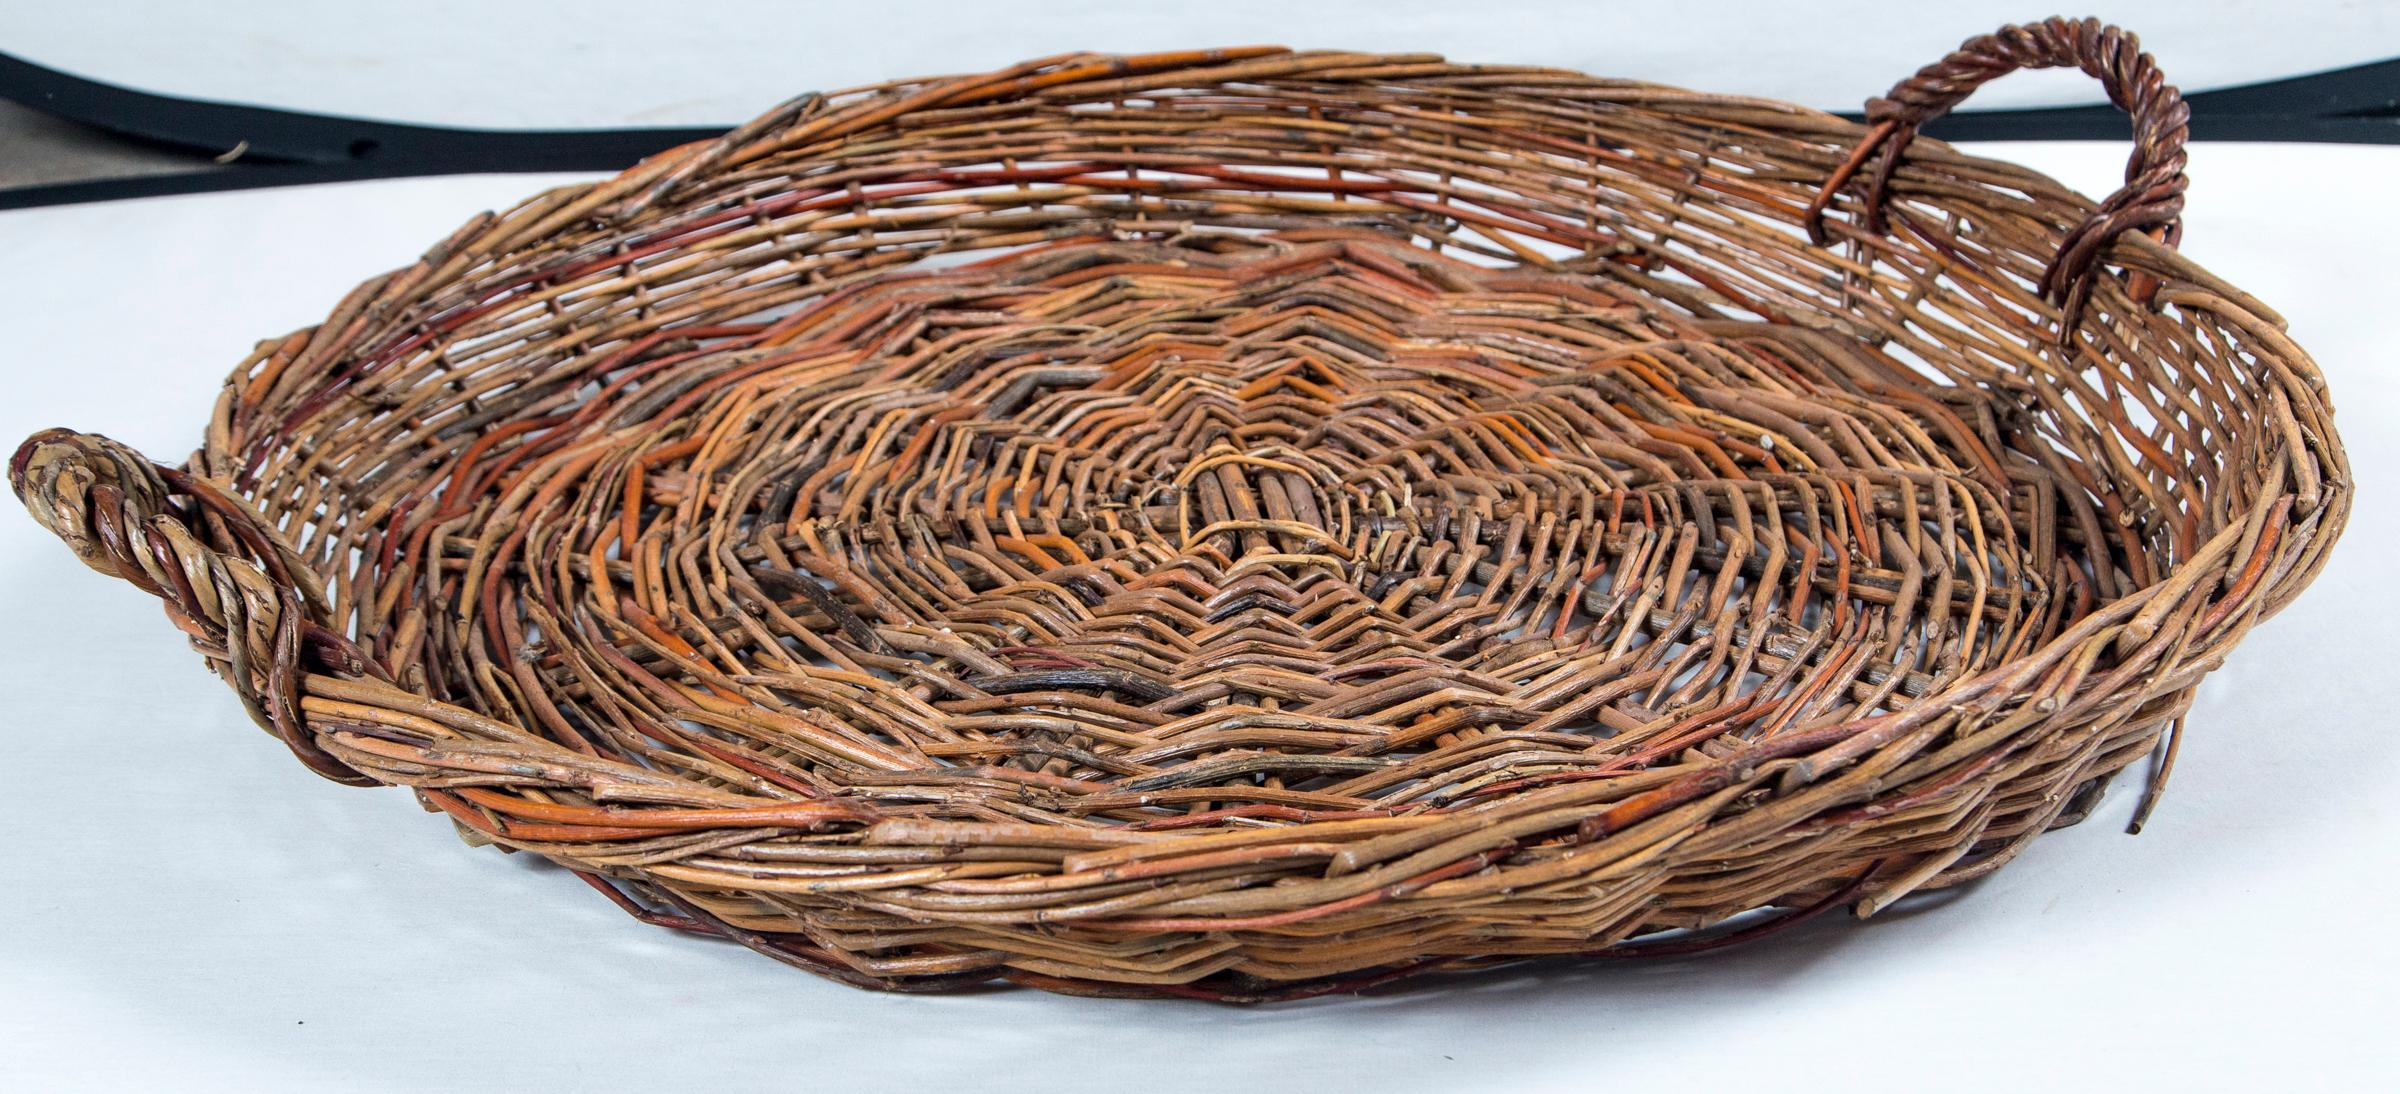 Vintage Wicker grape basket, France, circa 1950. Woven willow wicker with 2 handles. A vineyard basket used in the field during the grape harvest.